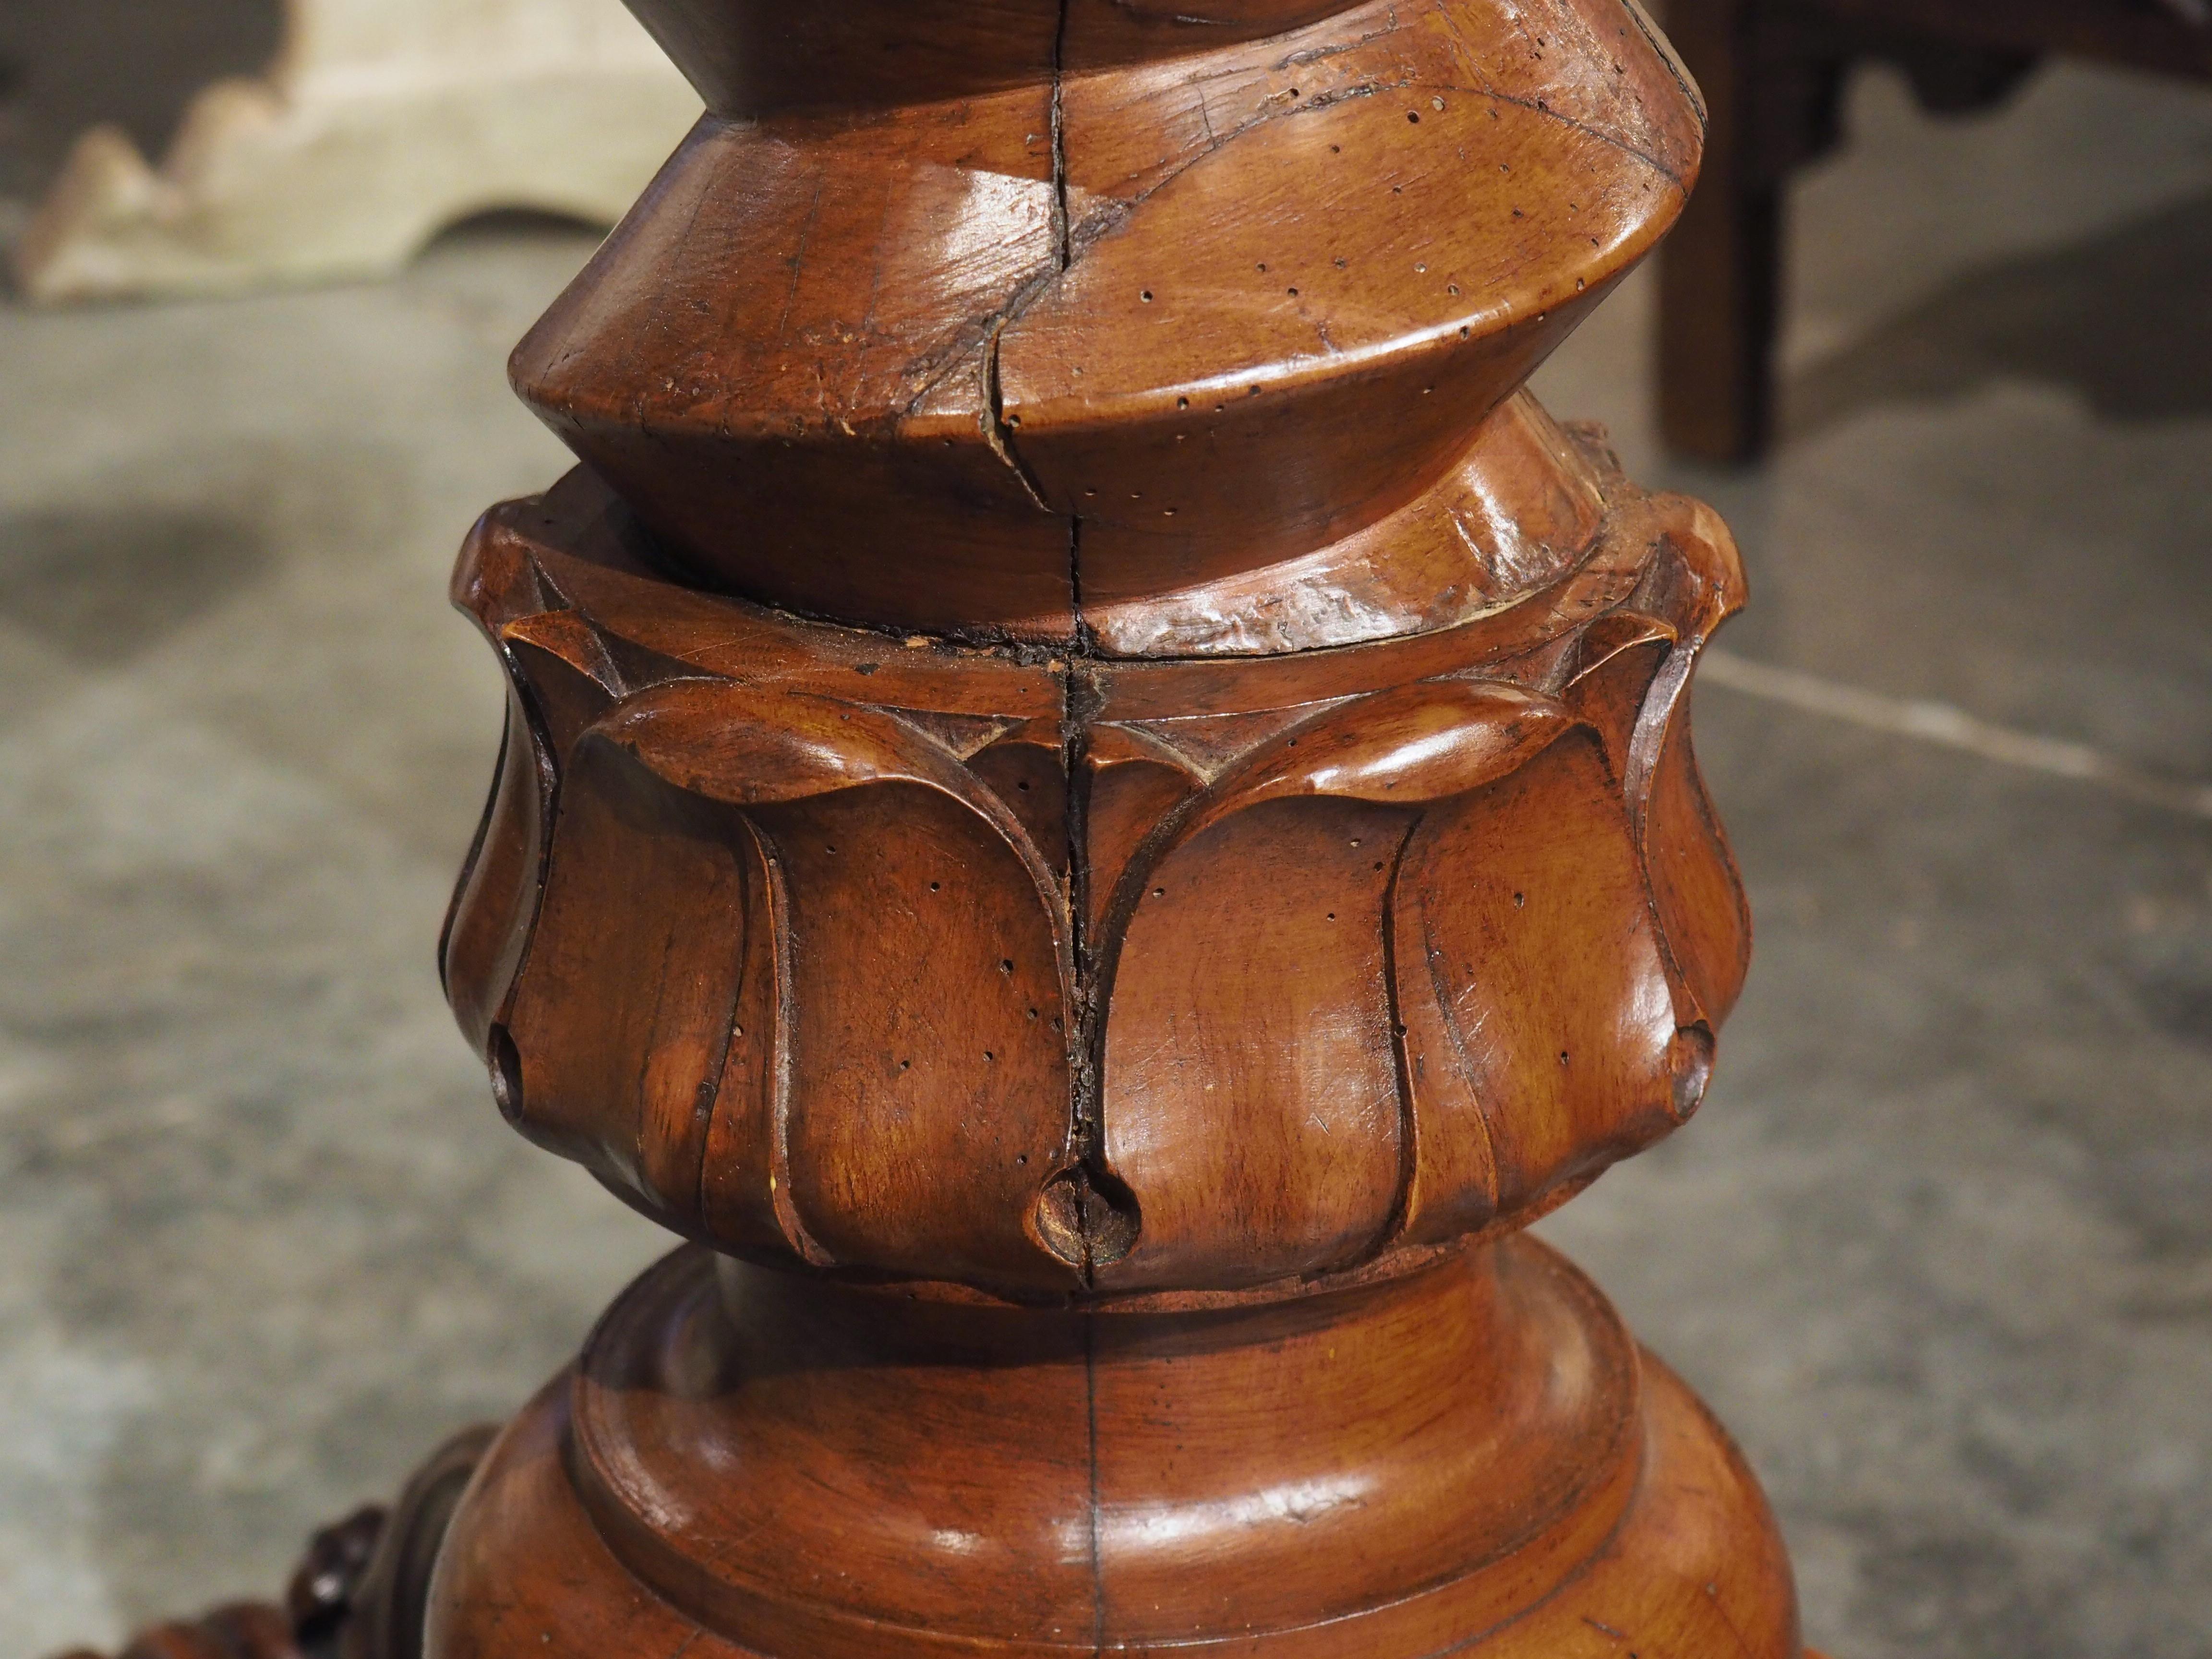 Hand-carved in France, circa 1850, these fascinating wine press screws have been repurposed to form the columns of this rare pair of sellettes, or tall pedestals. Originally used at a French vineyard to extract juice from grapes by applying